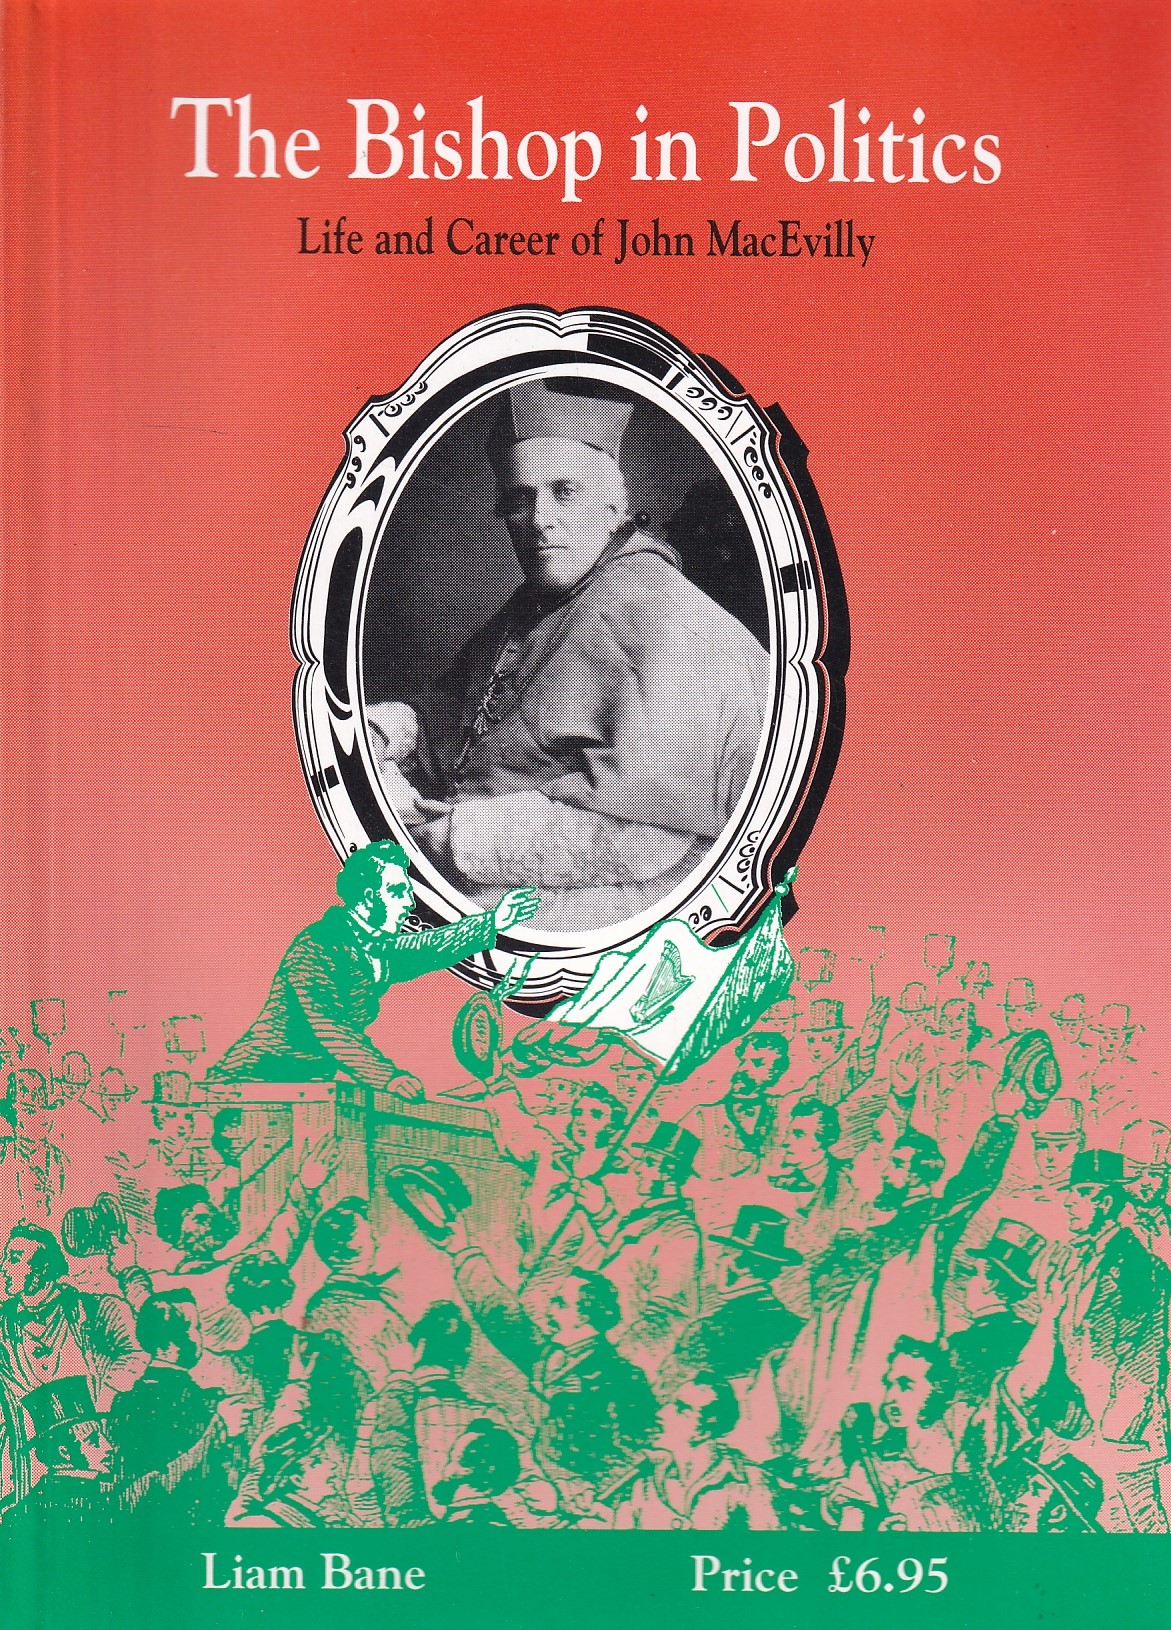 The Bishop in Politics: Life and Career of John MacEvilly by Liam Bane